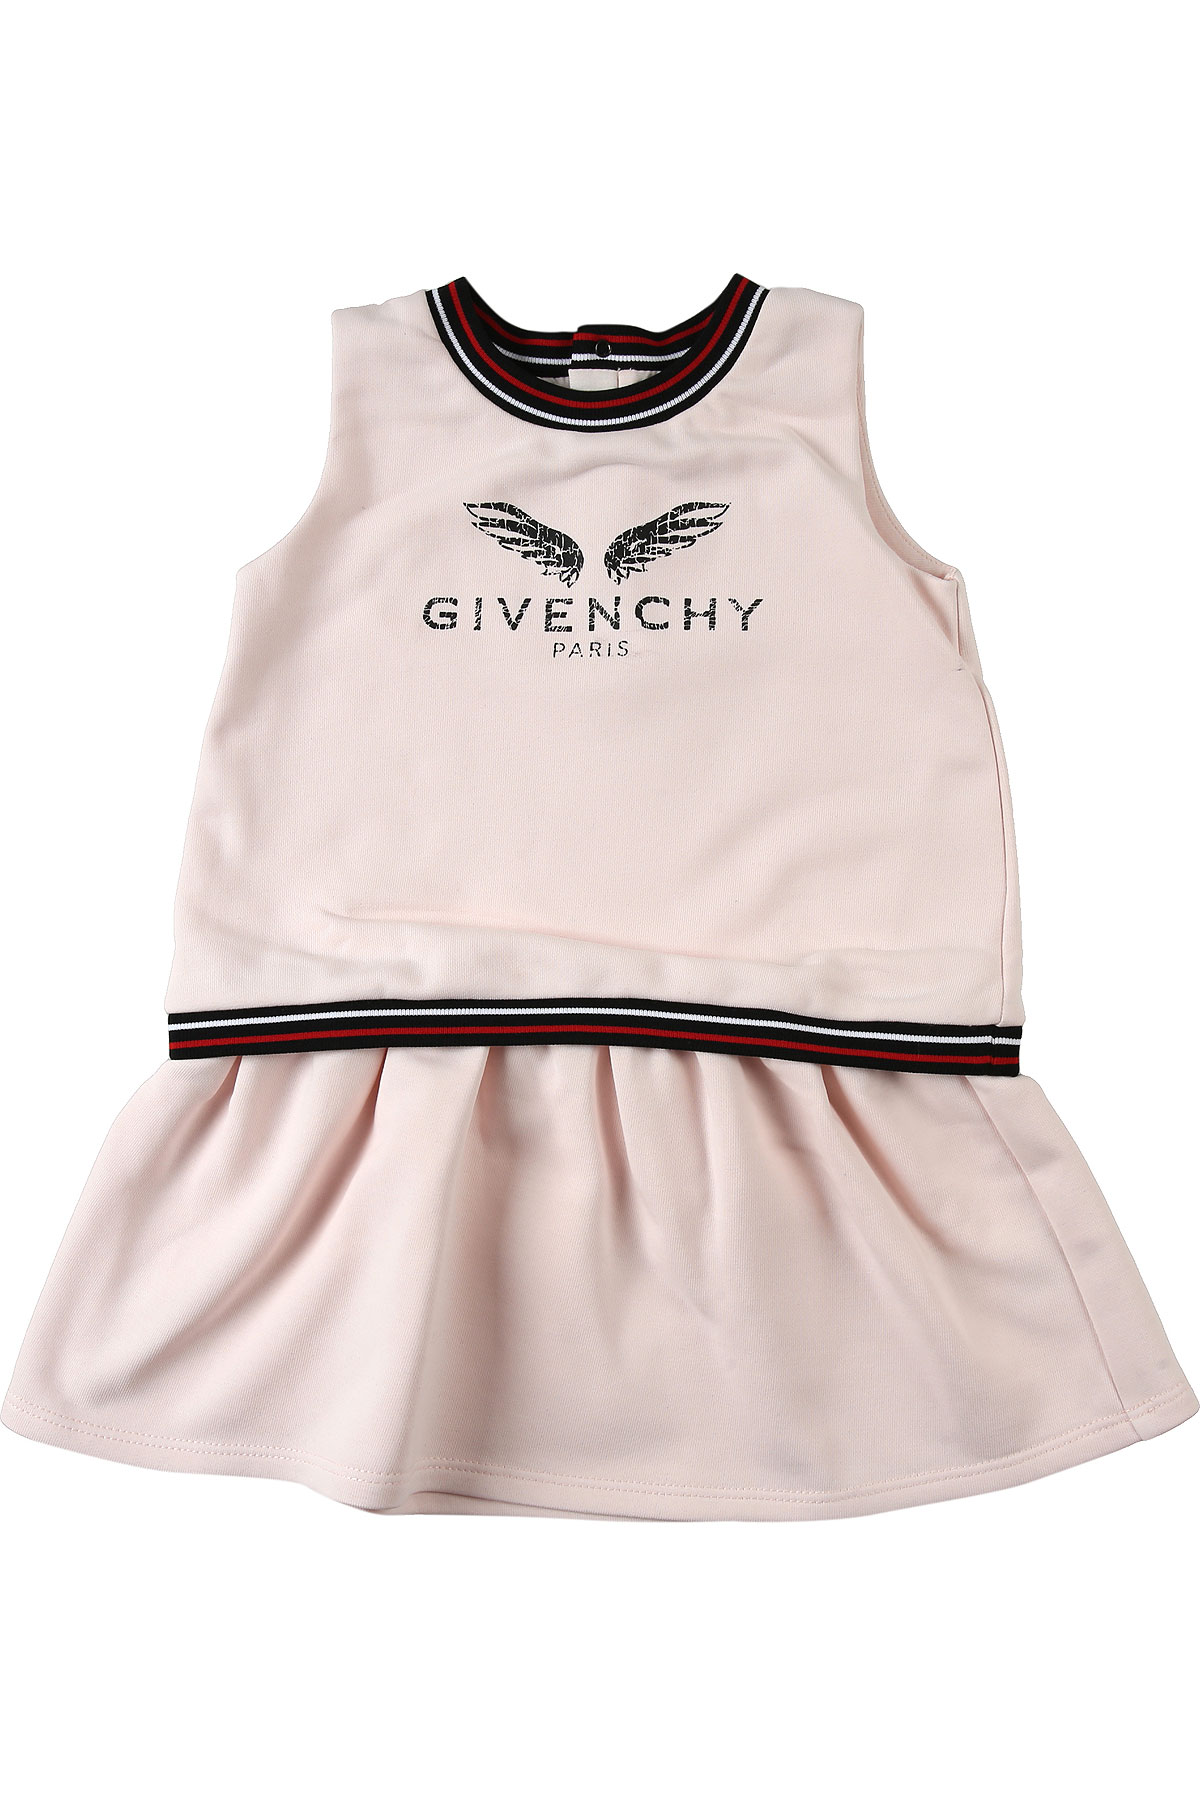 givenchy baby clothes